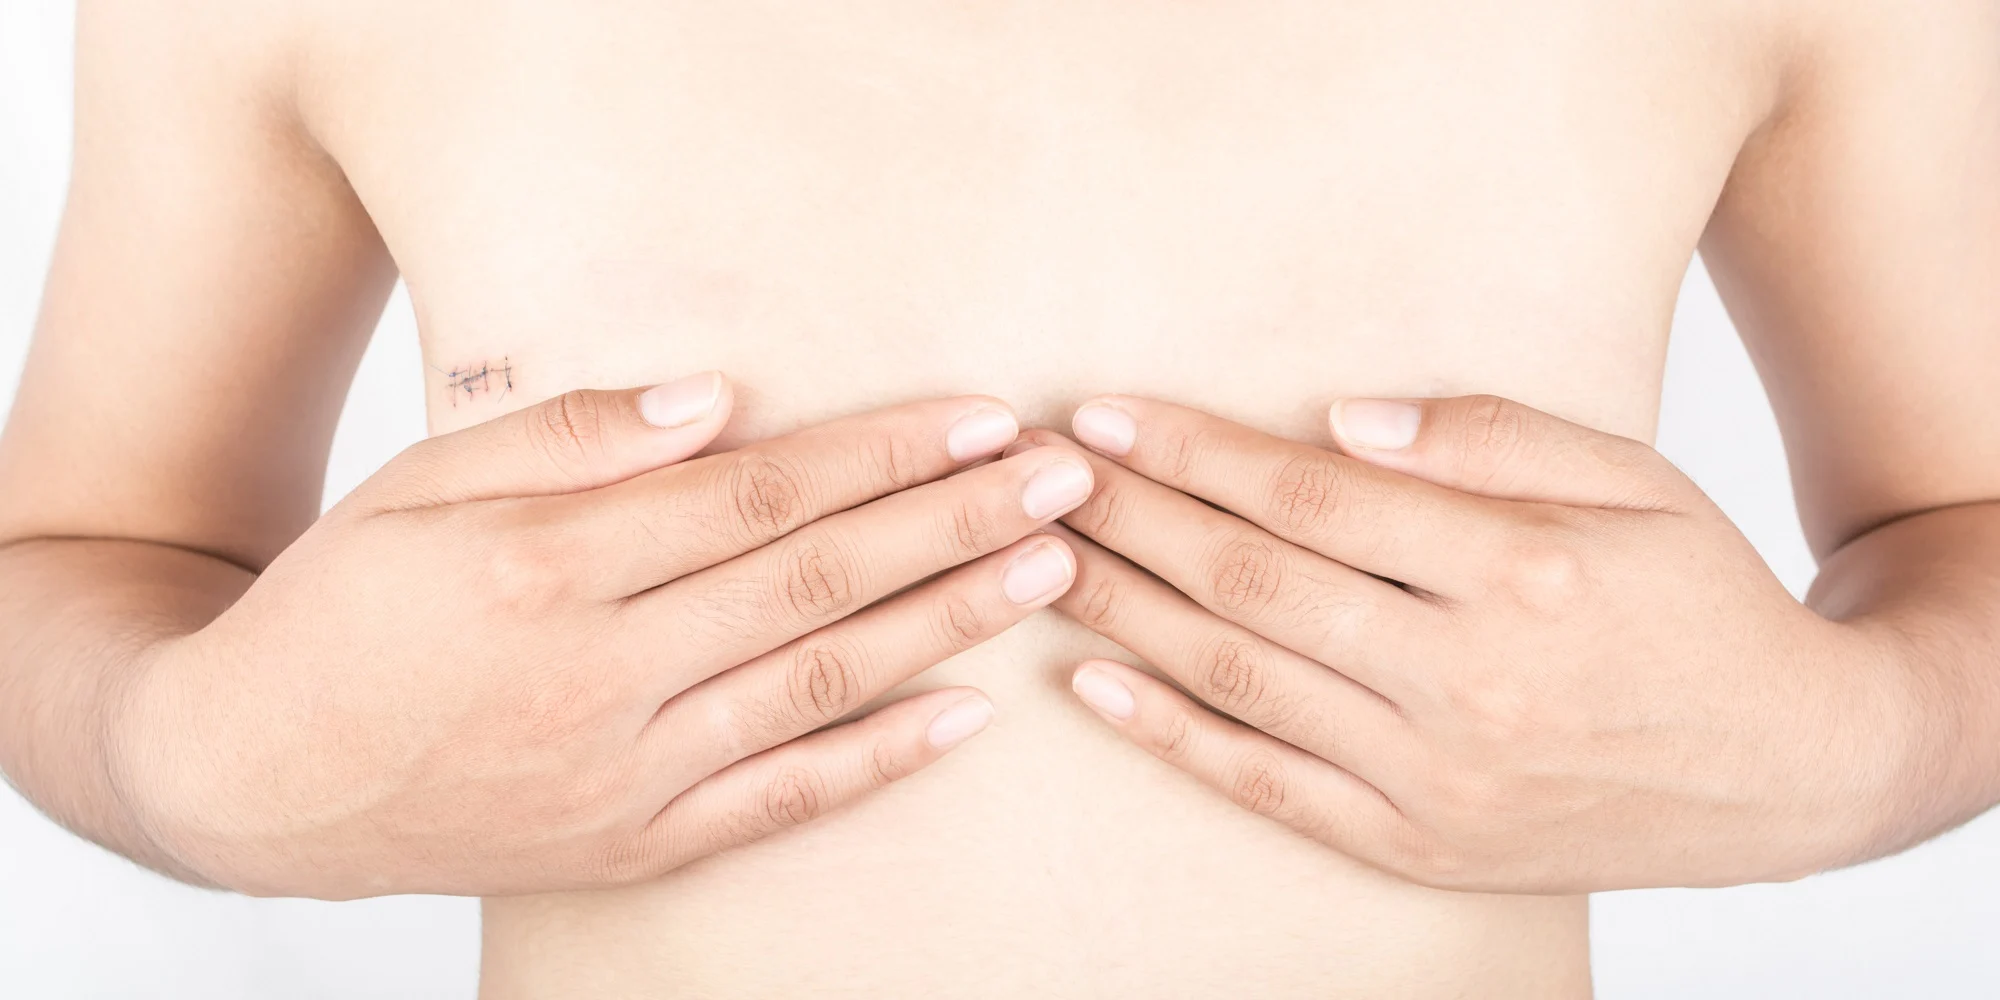 Choosing the Right Breast Reconstruction: Options After Mastectomy